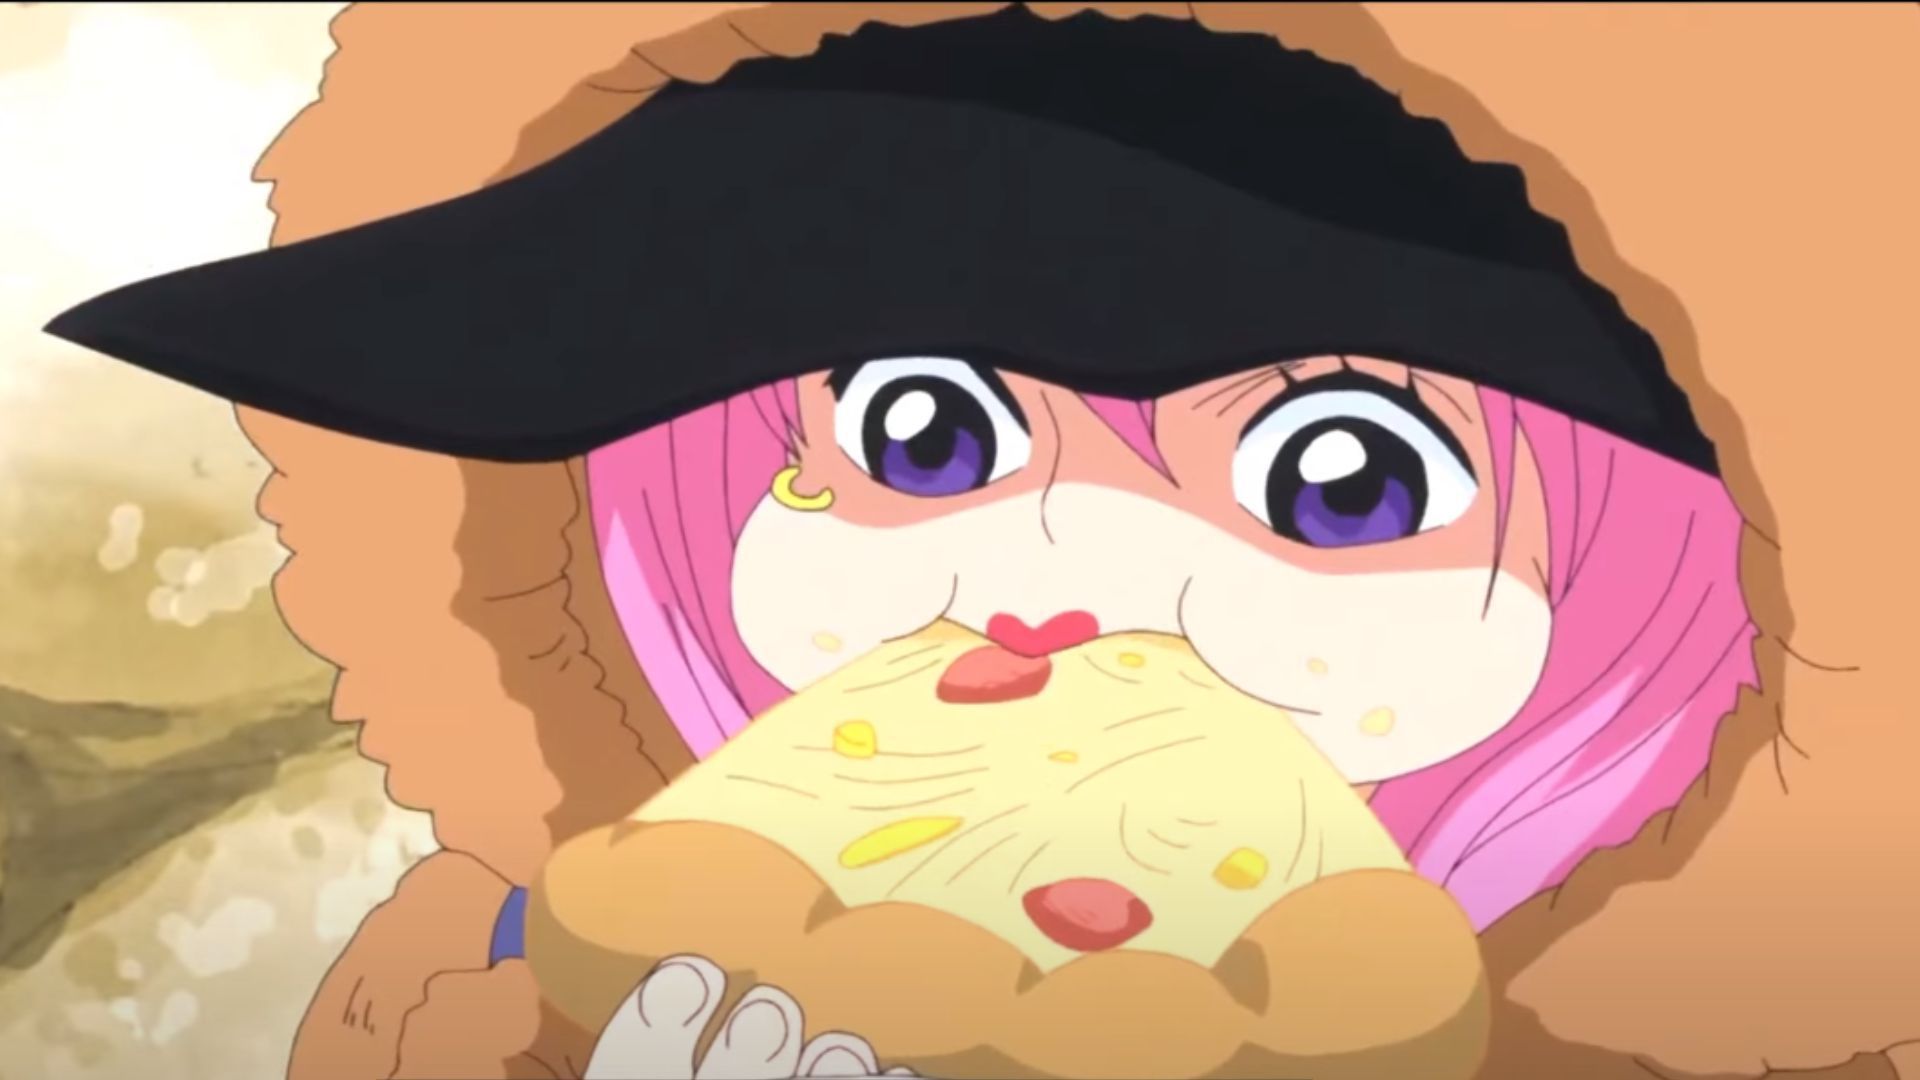 Bonney using her powers to turn young in One Piece (Image via Toei Animation)